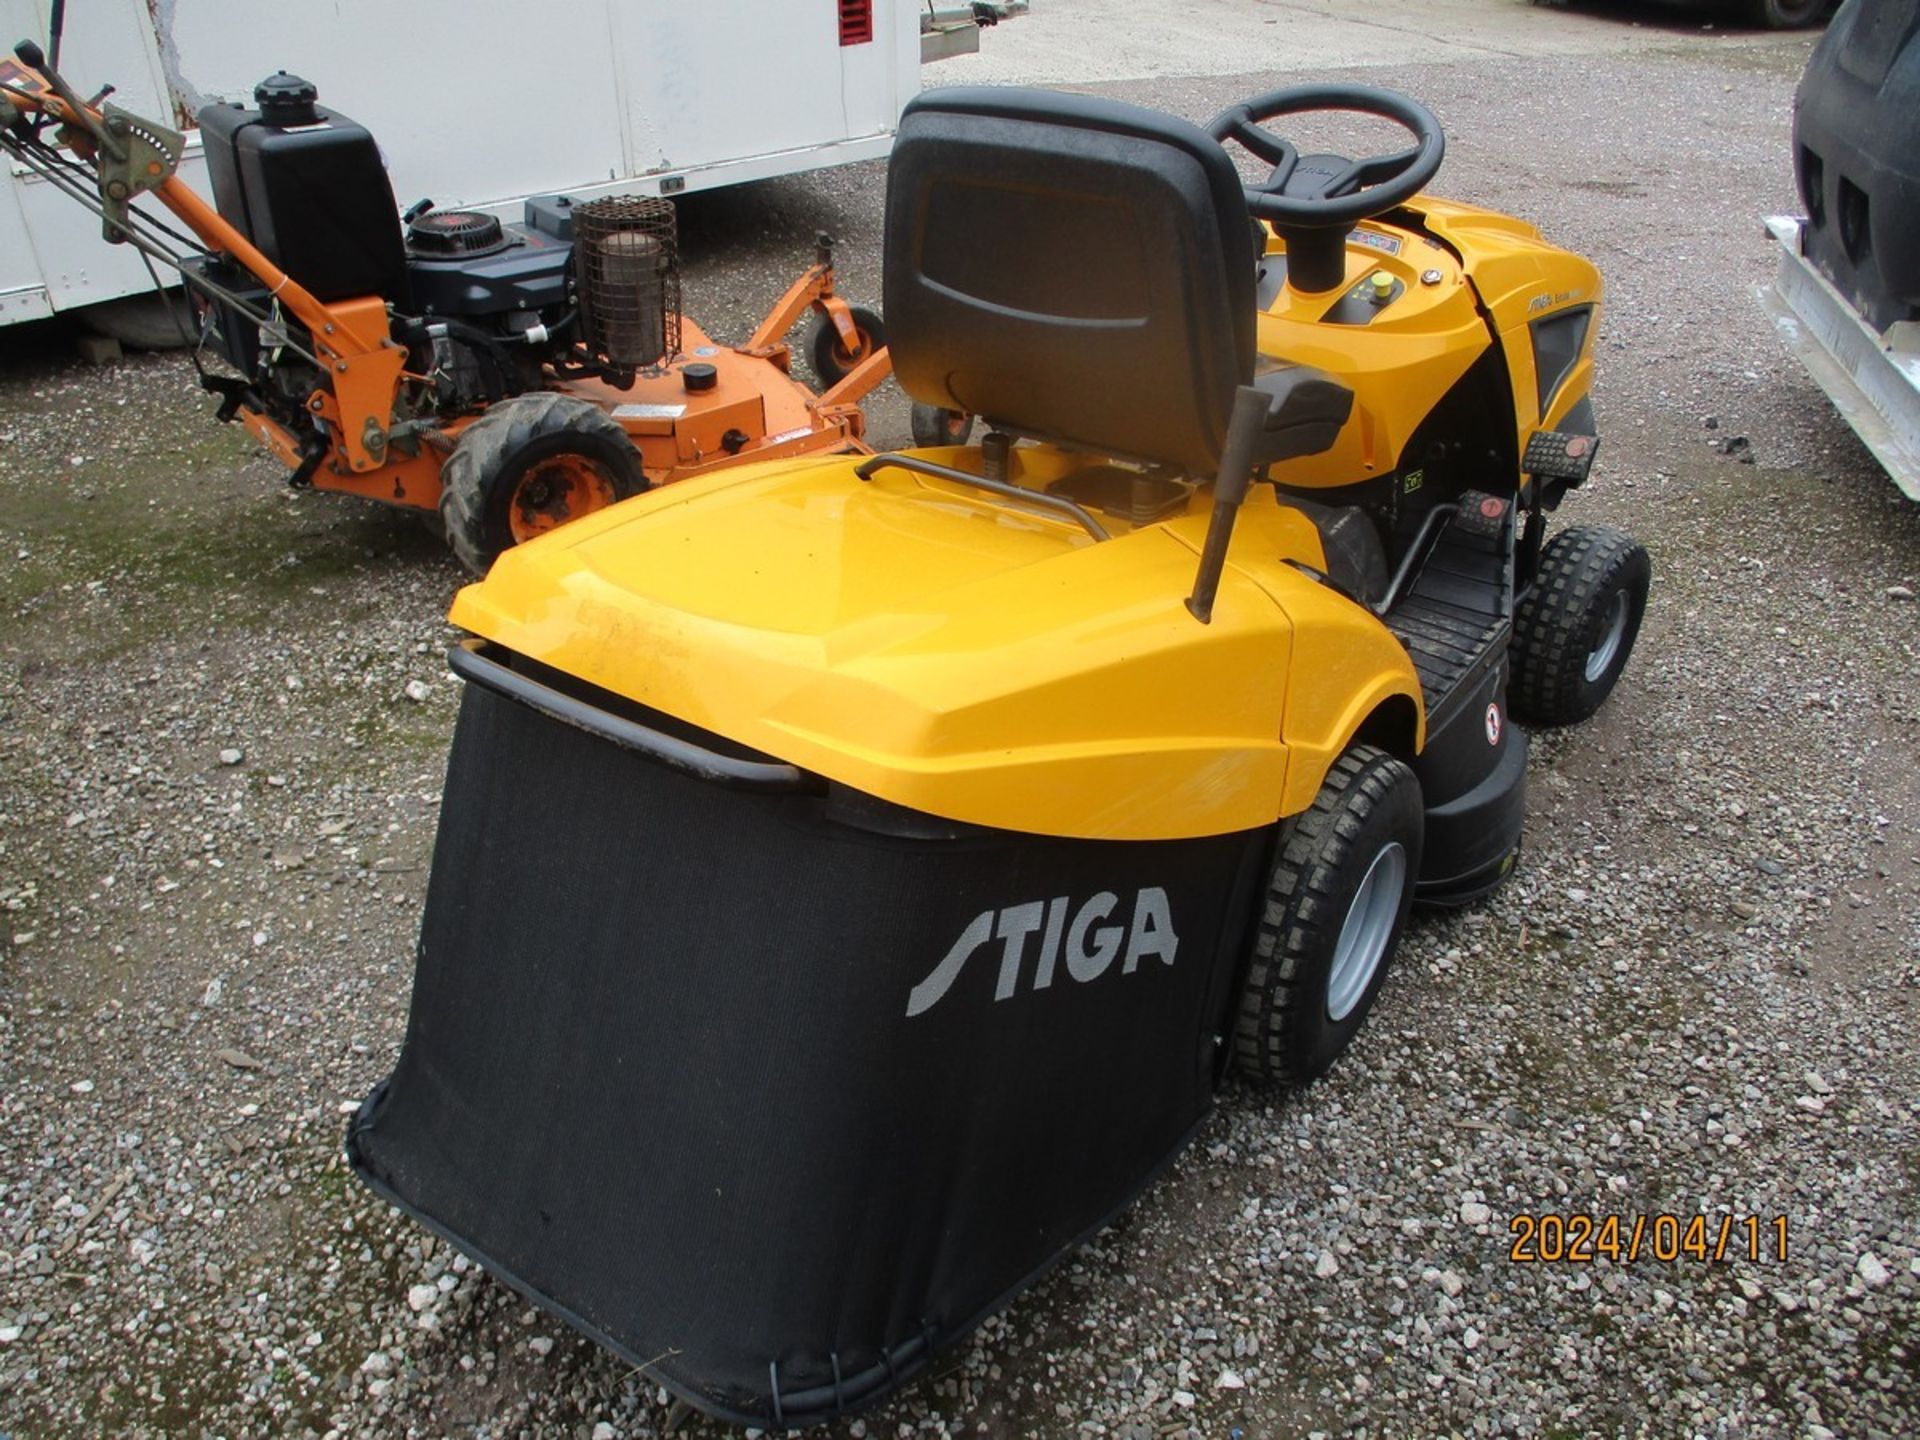 STIGA ESTATE 6092 HW RIDE ON MOWER C.W COLLECTOR CAN BE USED AS A MULCHER - Image 5 of 6